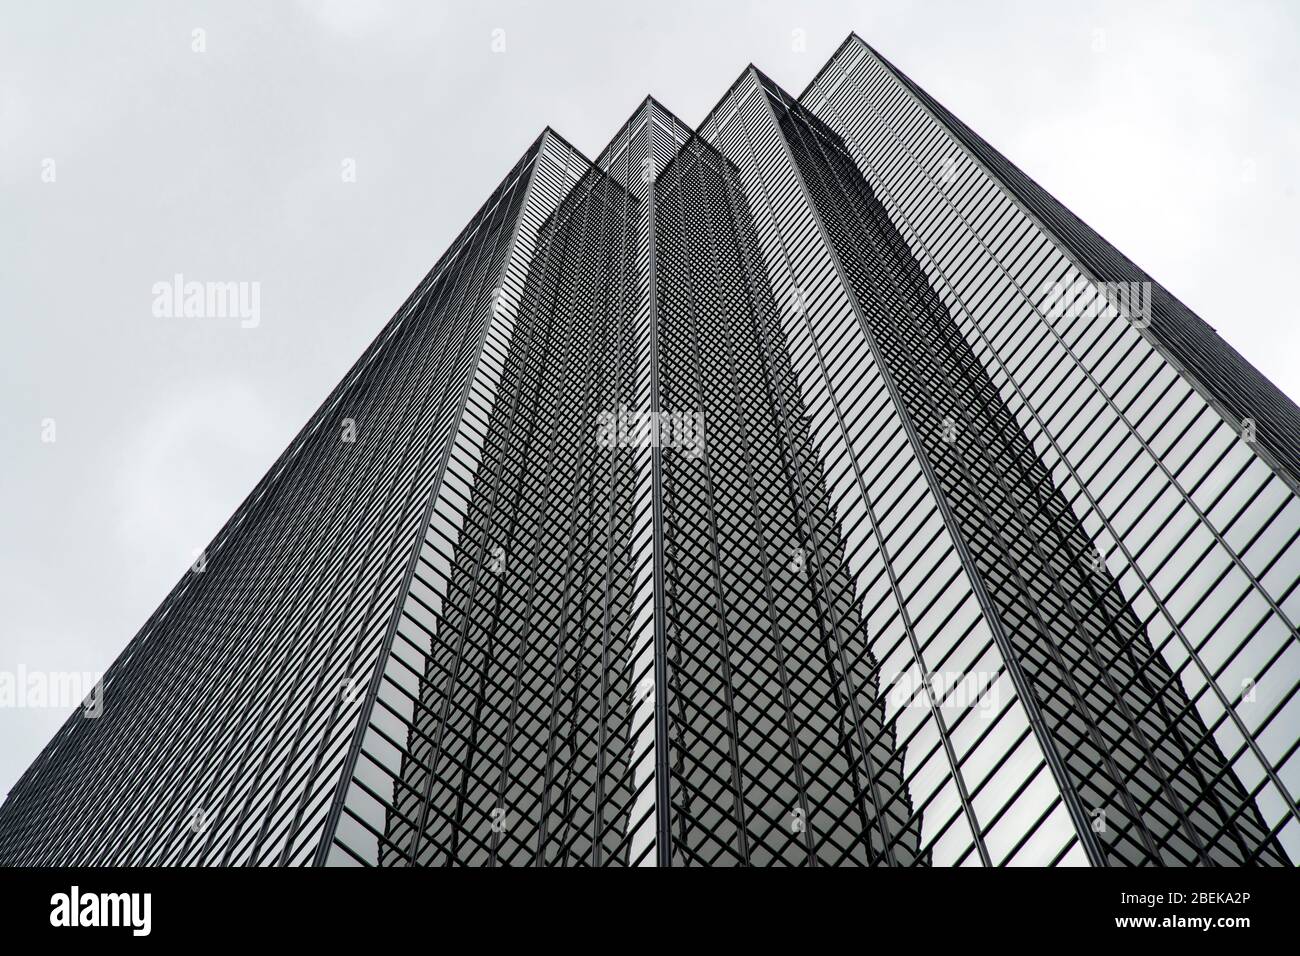 Dallas, Texas, USA. Downtown. Bank of America Plaza is a 72-story, 280.7 m (921 ft) late-modernist skyscraper located in the Main Street. Stock Photo